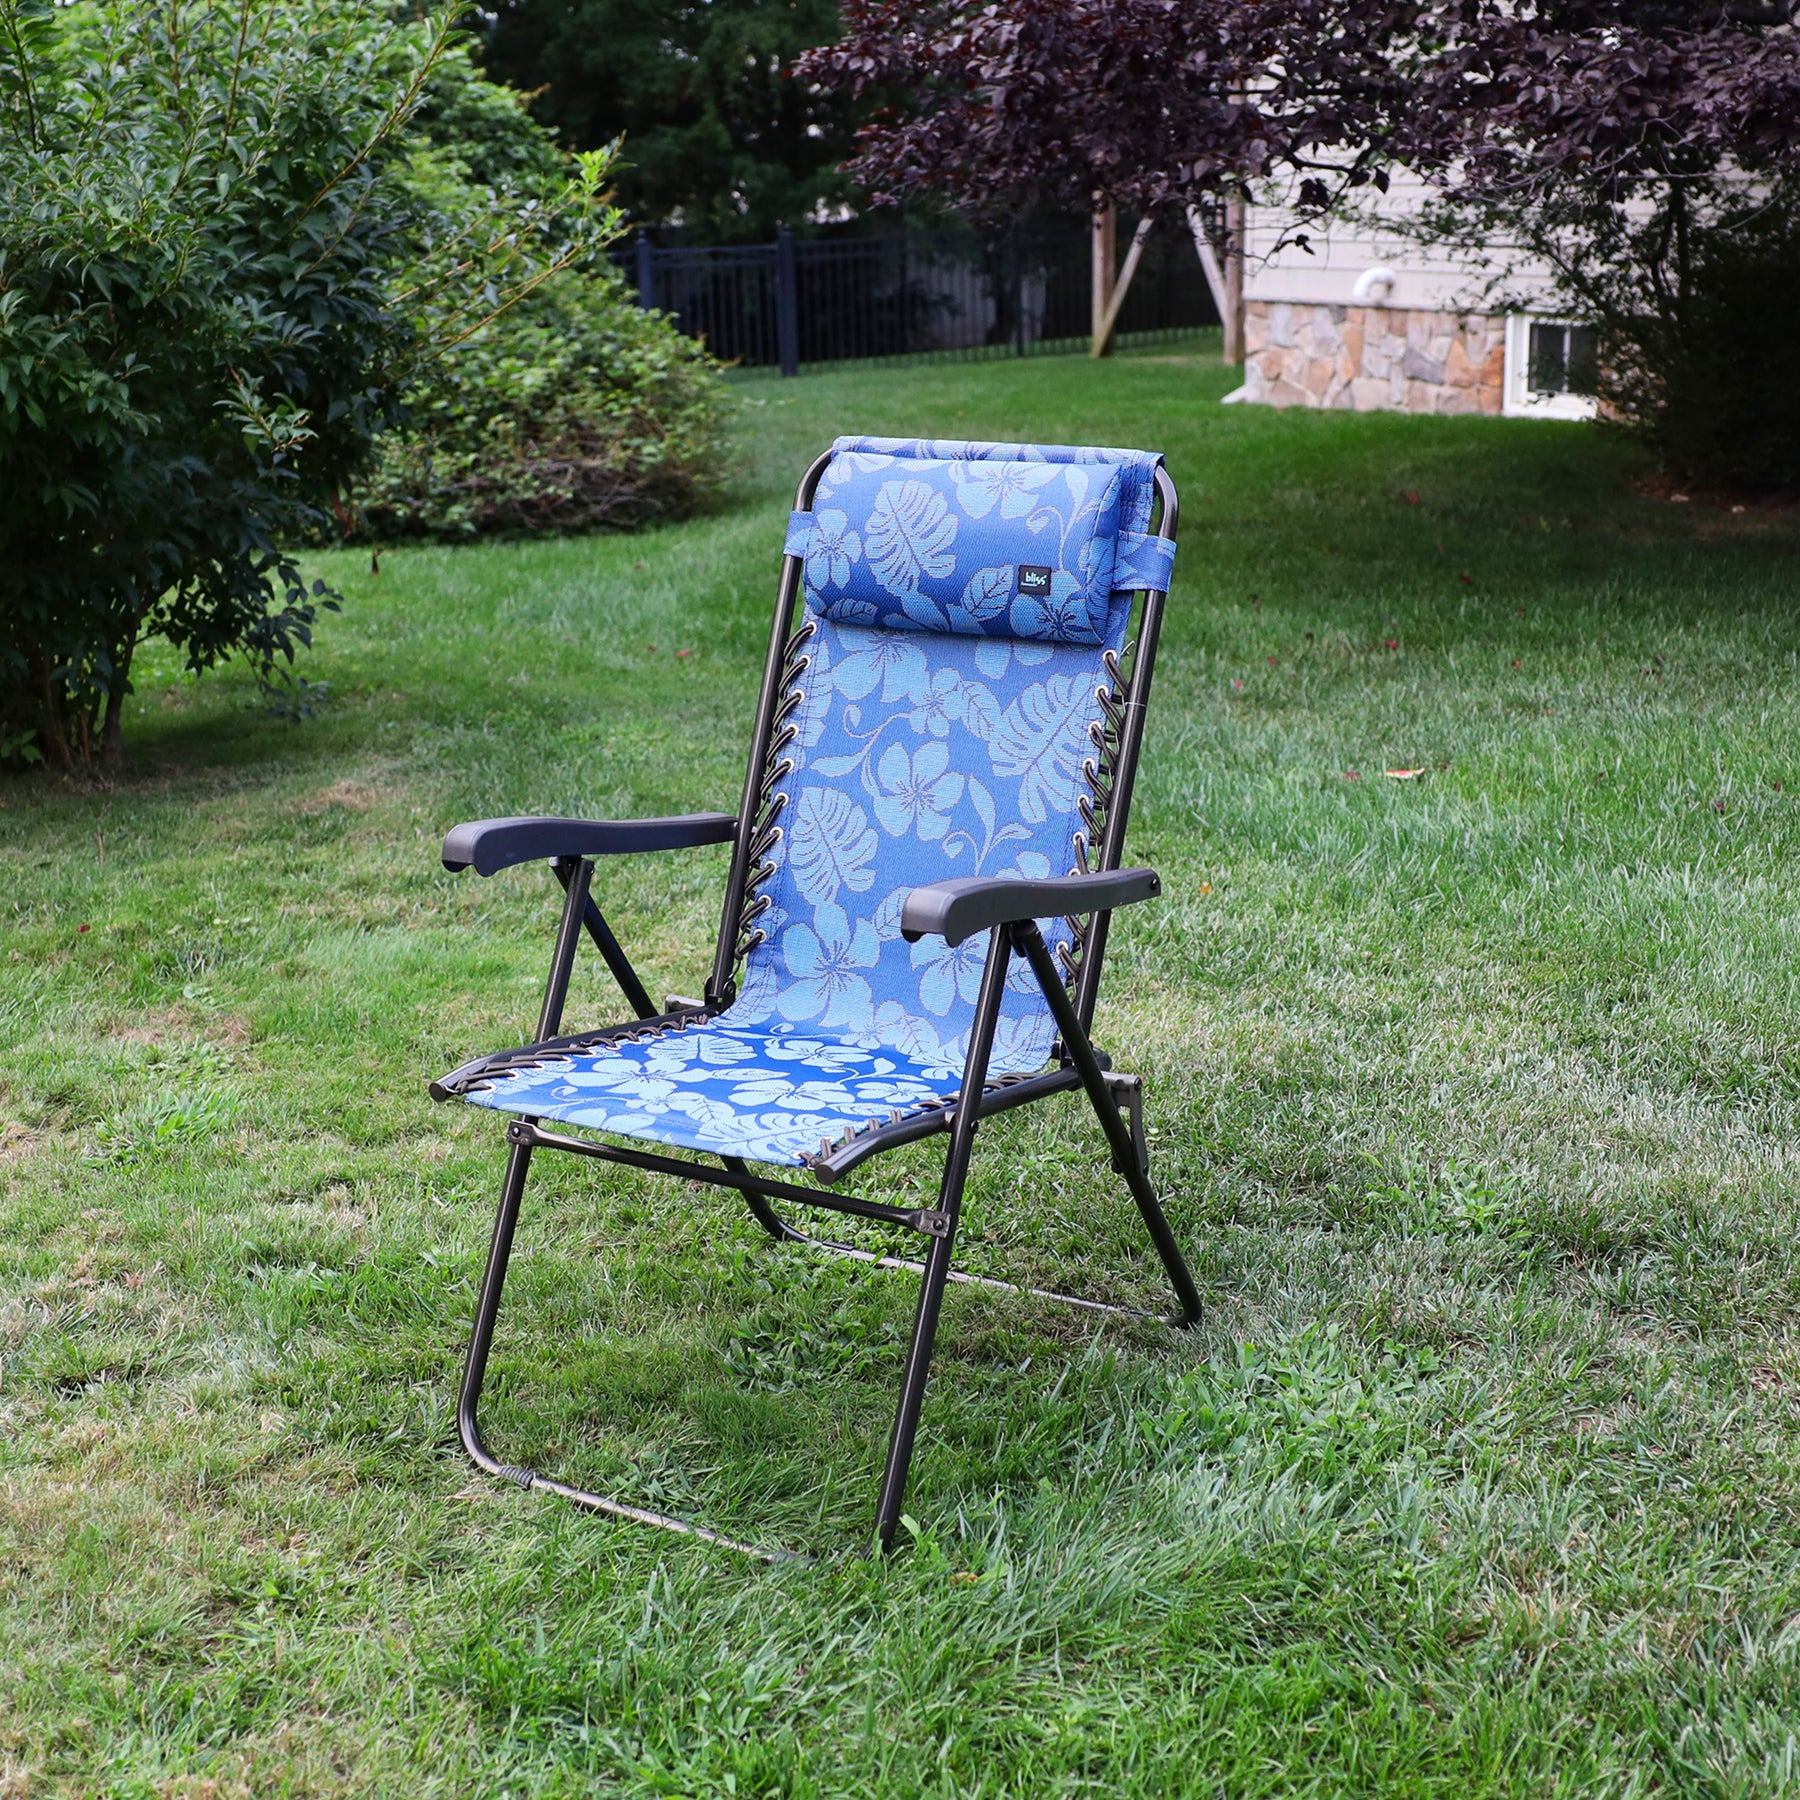 26-inch Reclining Blue Flower Sling Chair on a lawn.